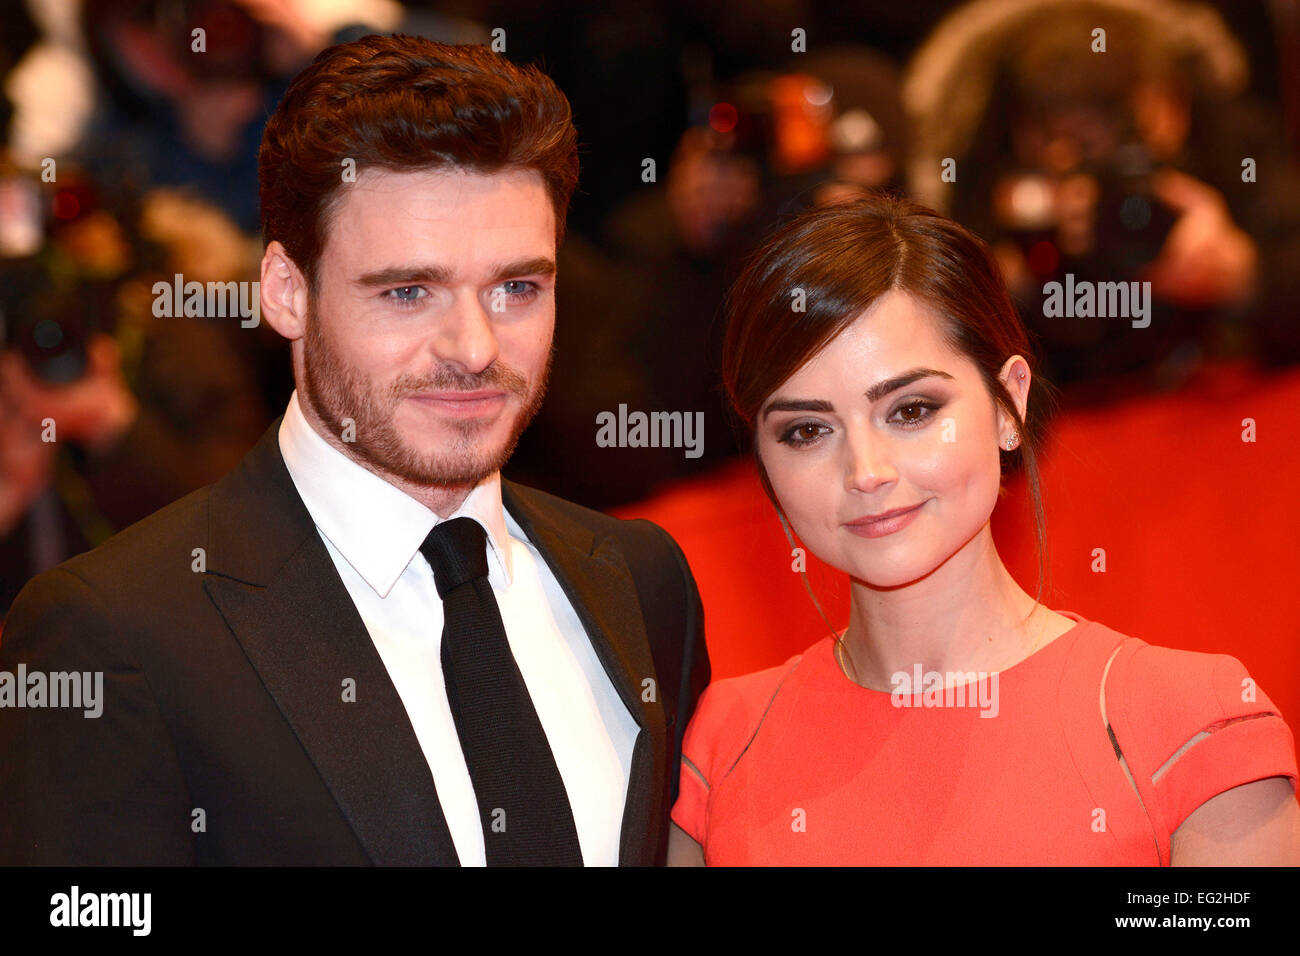 Richard Madden and Jenna-Louise Coleman attending the 'Cinderella' premiere at the 65th Berlin International Film Festival / Berlinale 2015 on February 13, 2015. Stock Photo